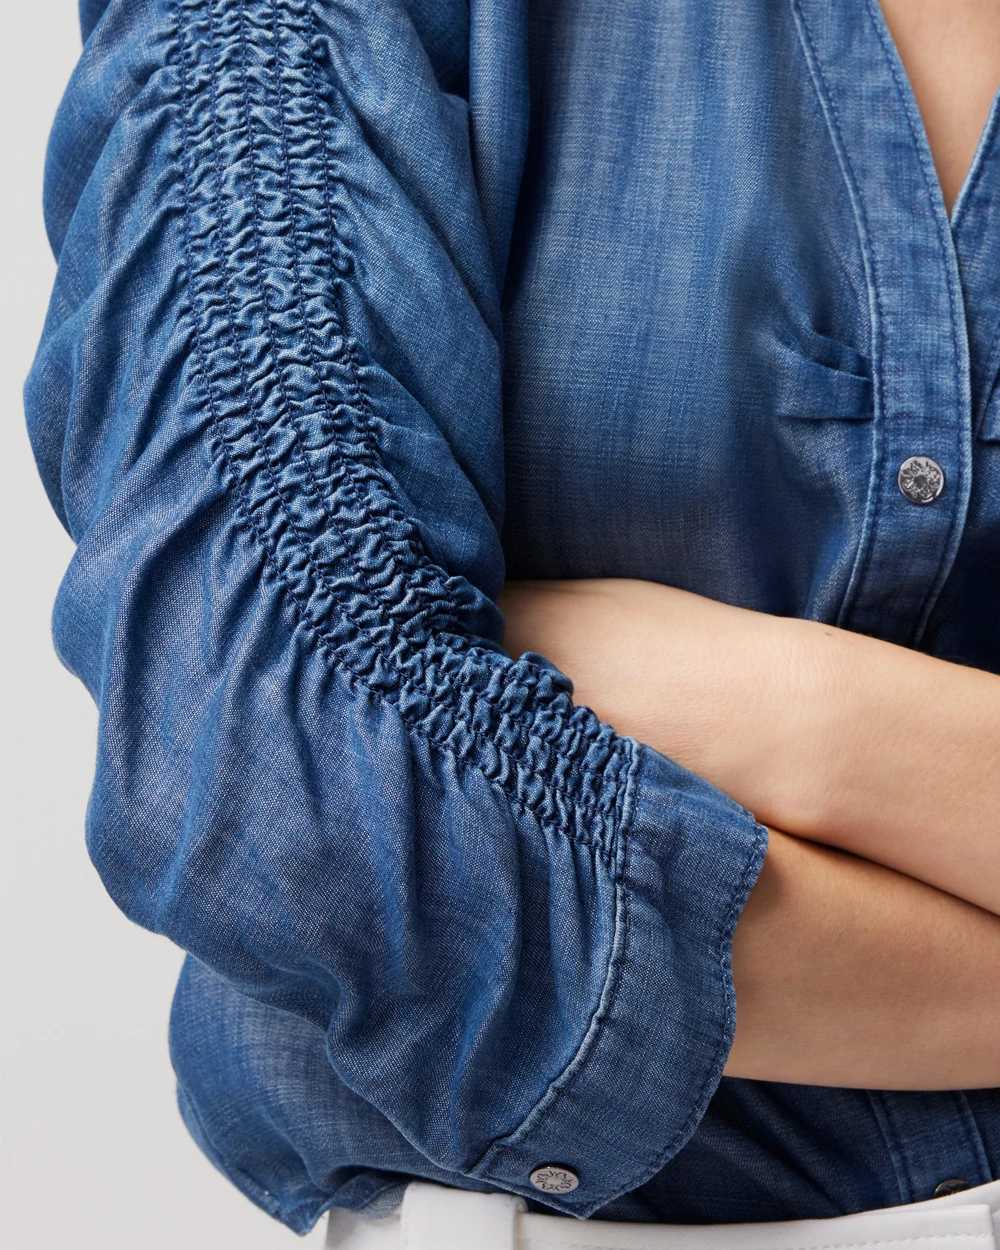 Elbow Sleeve Smocked Denim Shirt click to view larger image.